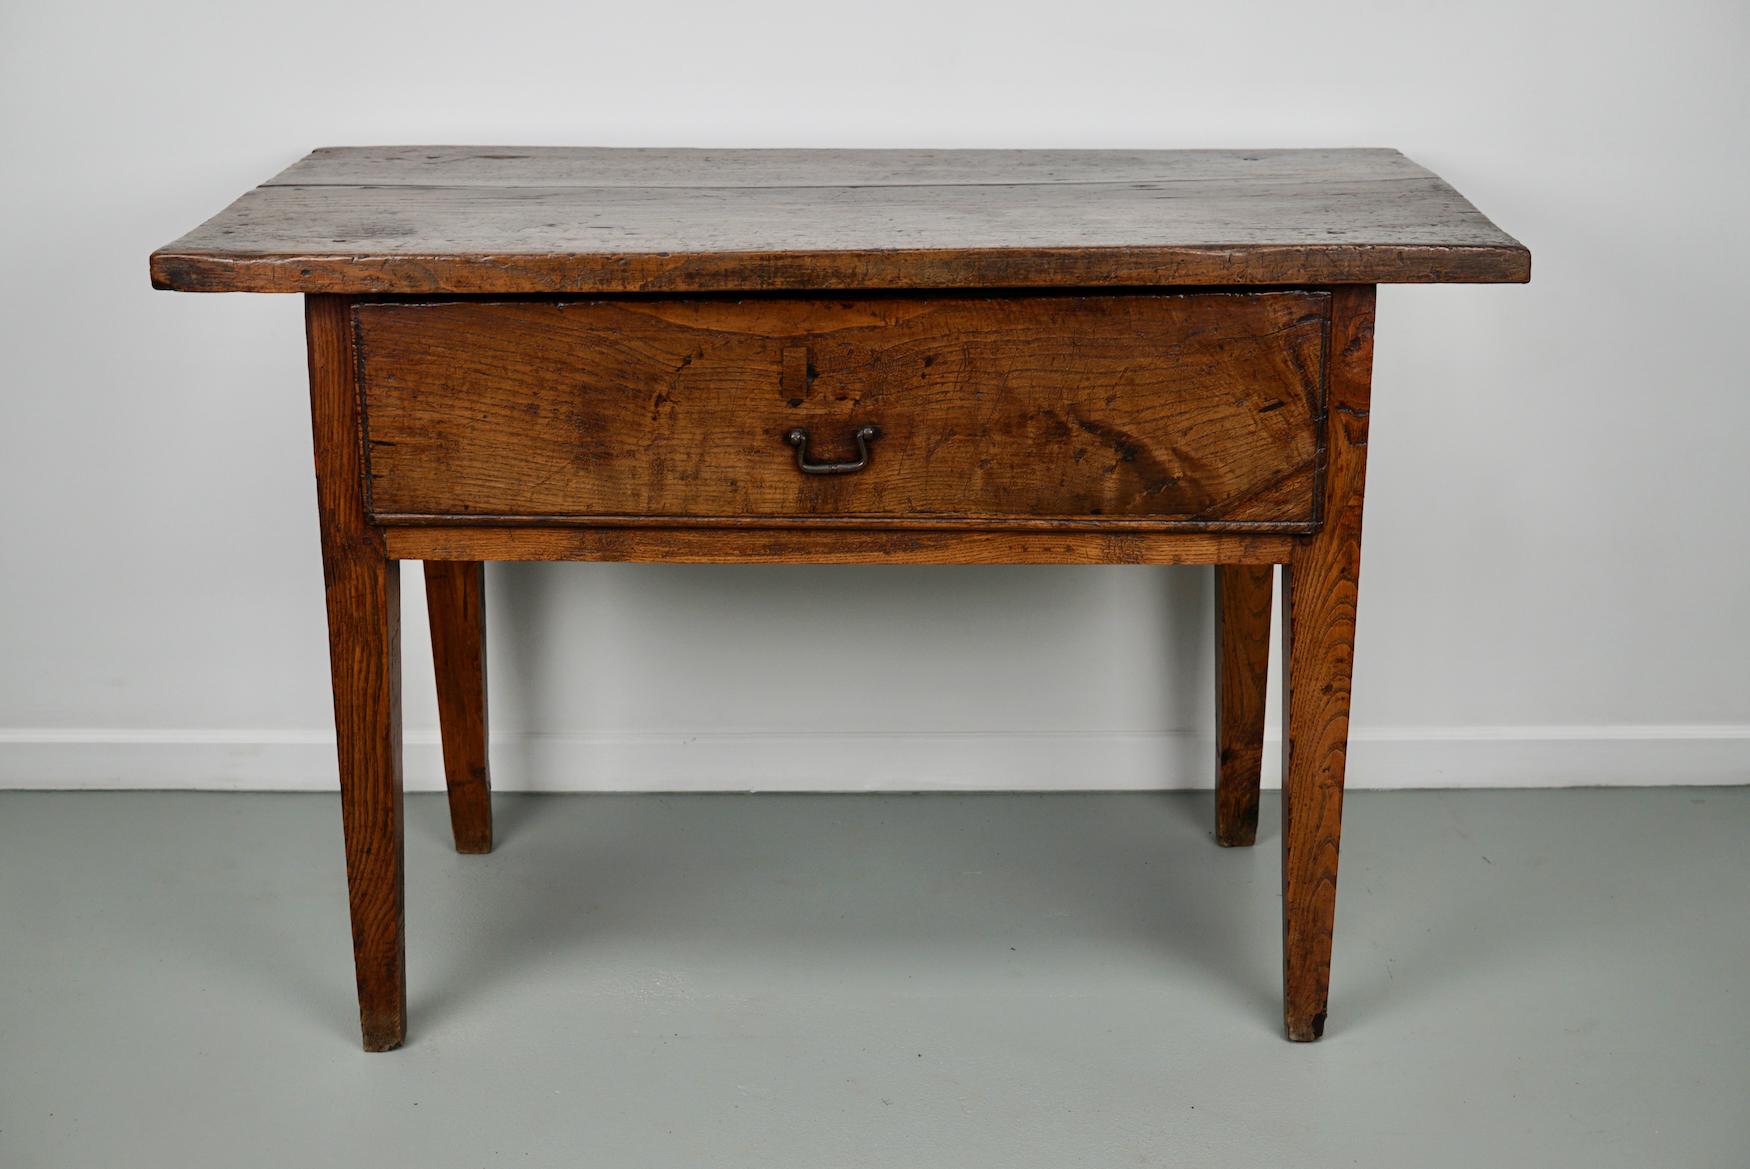 Antique Spanish Rustic Farmhouse Chestnut Side Table / Console, 18th Century For Sale 7